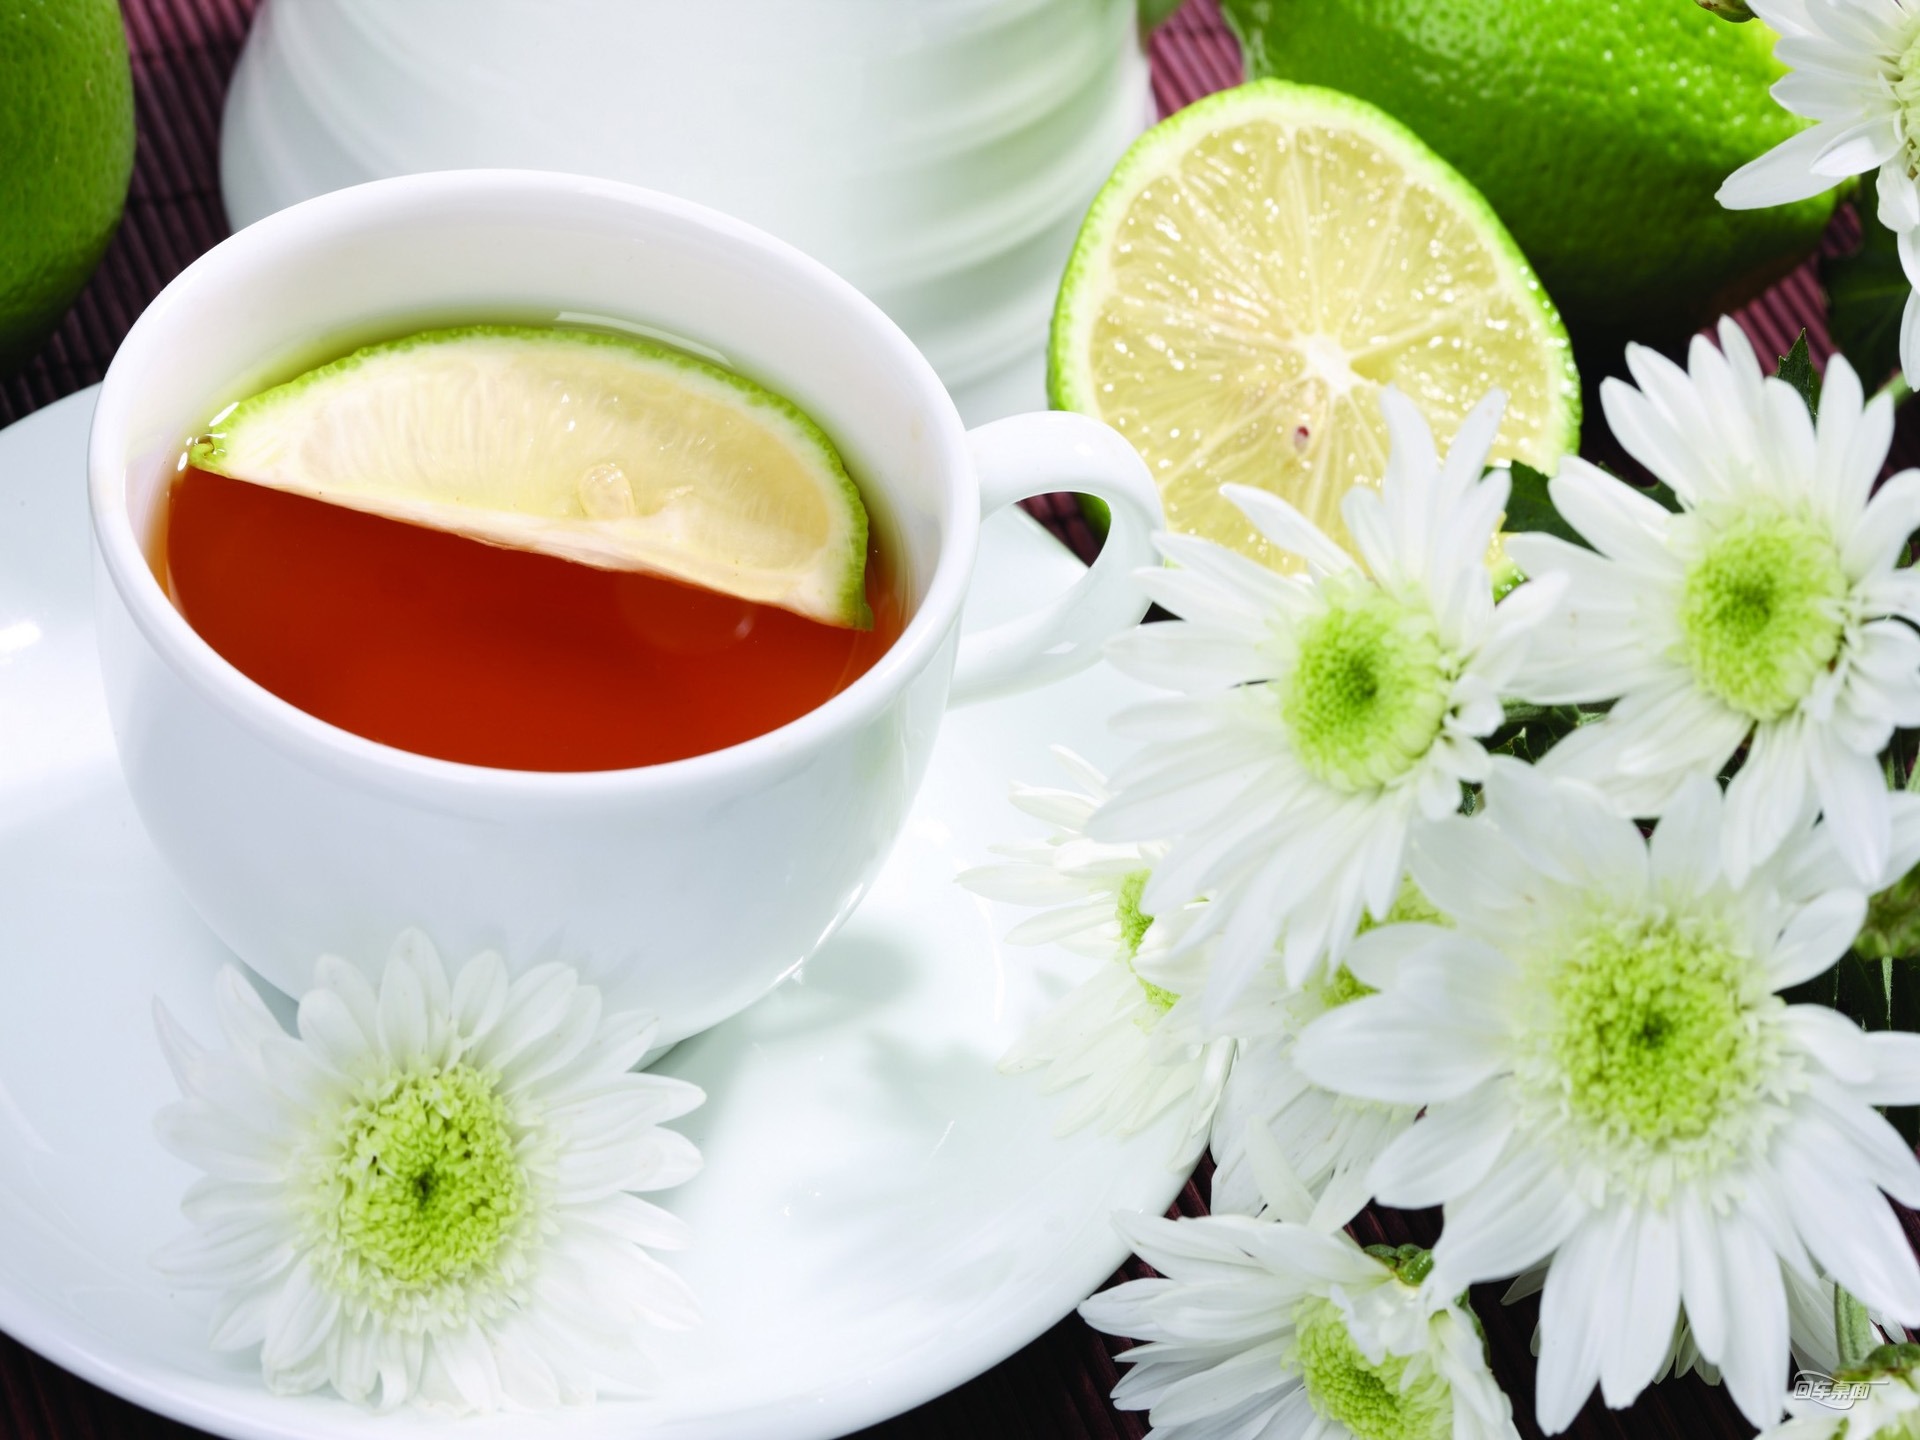 Cup of soaked fragrance of tea HD Wallpaper - 1920x1440 Wallpaper ...